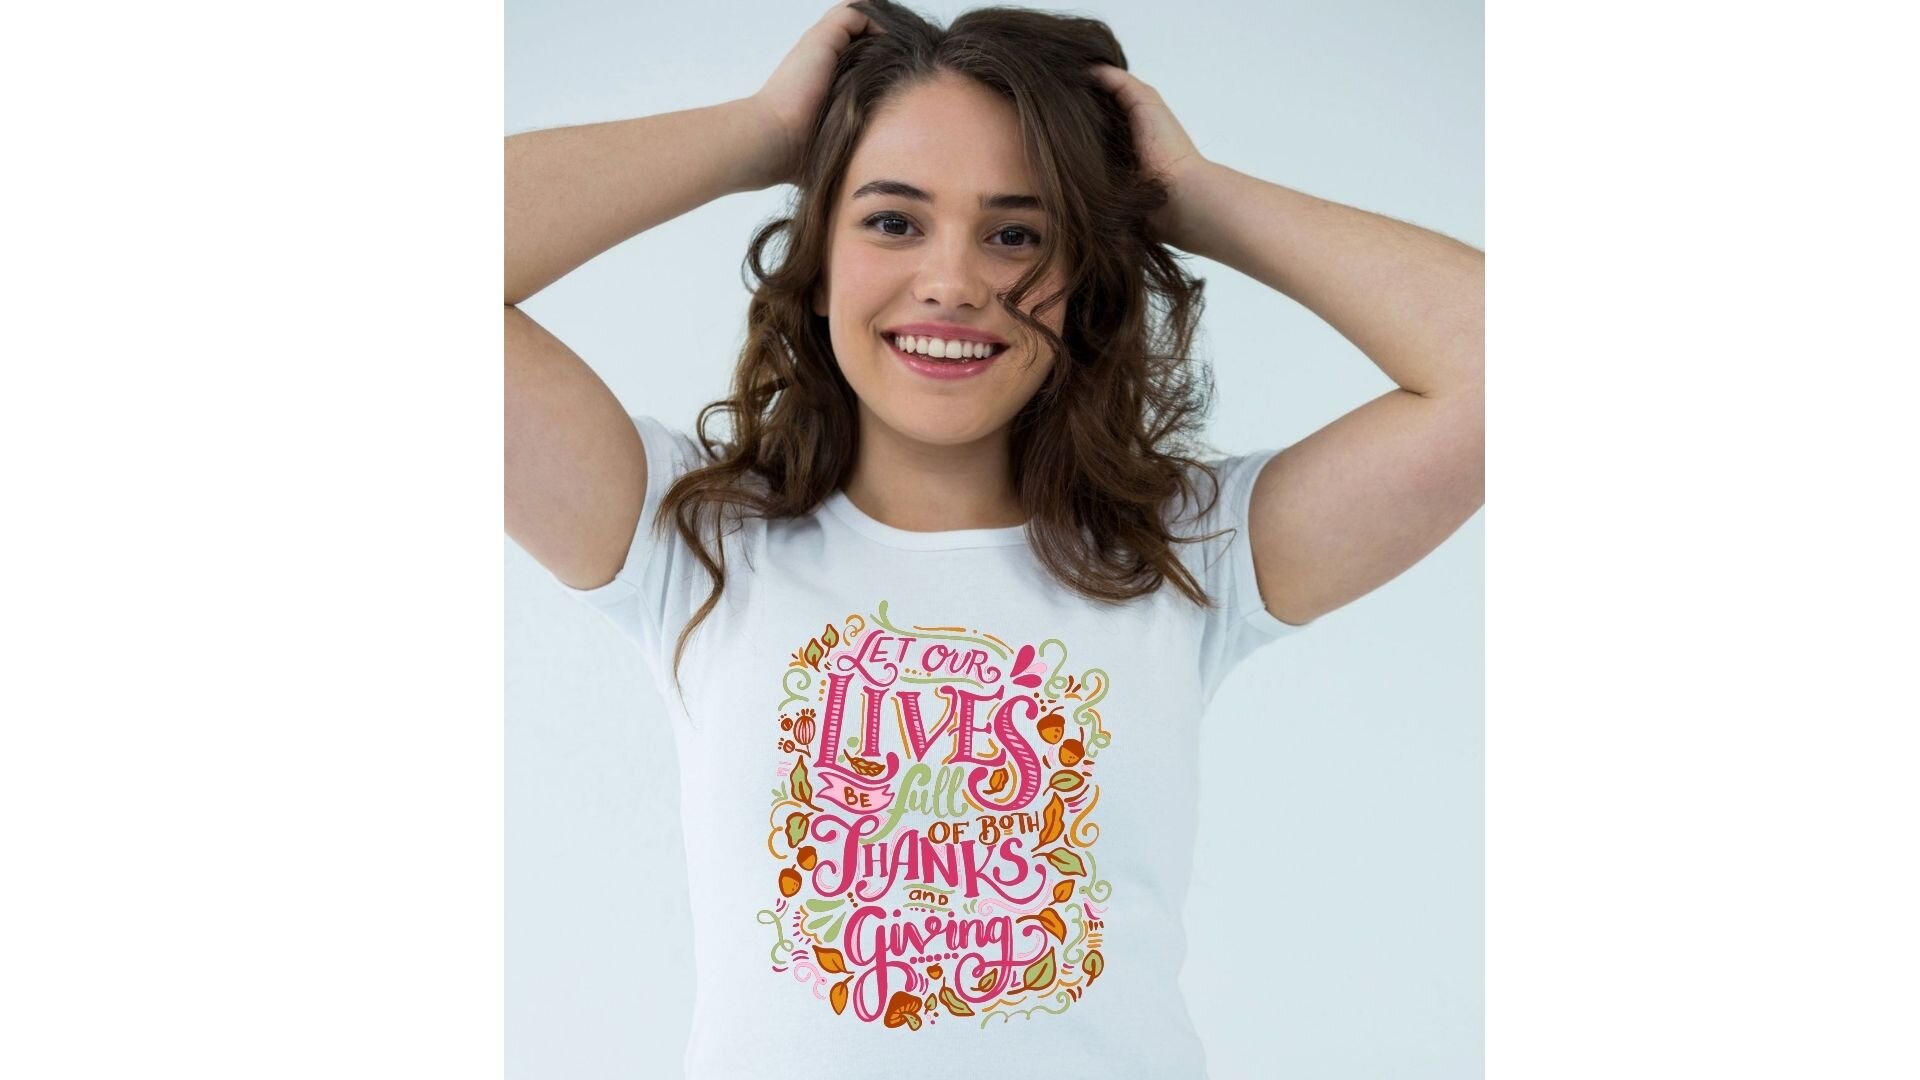 Let Our Lives Be Full Thanks and Giving T-shirt debbiewendell.com